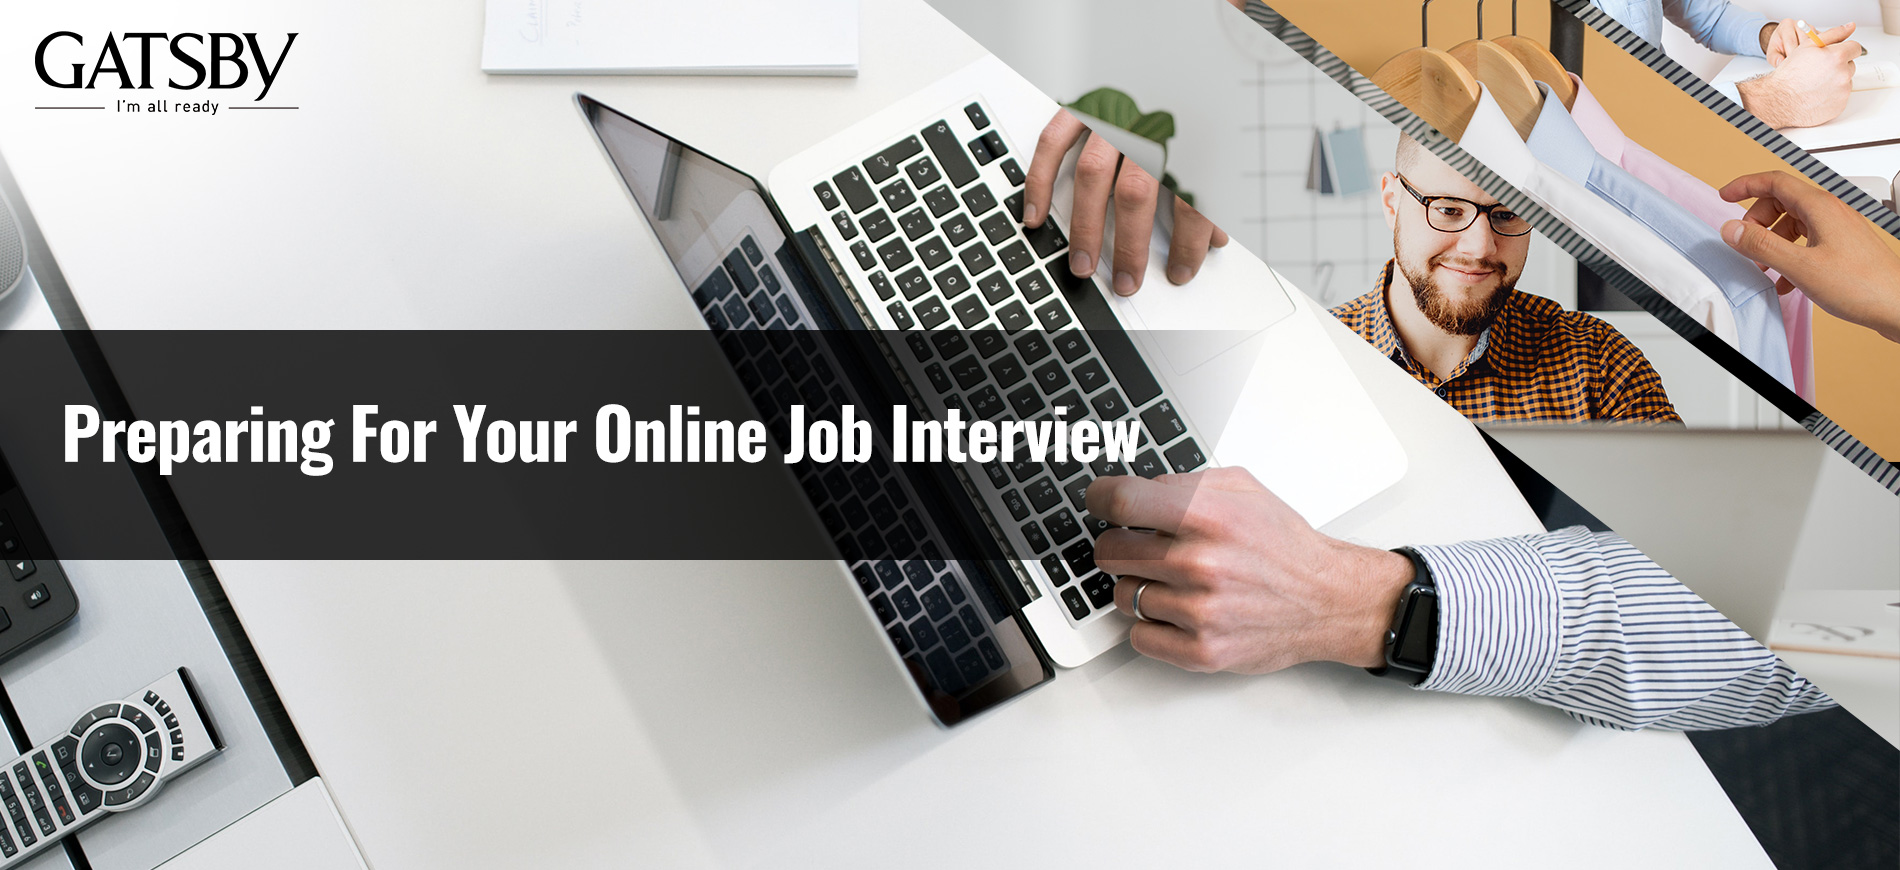 Preparing For Your Online Job Interview: 7 Tips on Making a Great First Impression